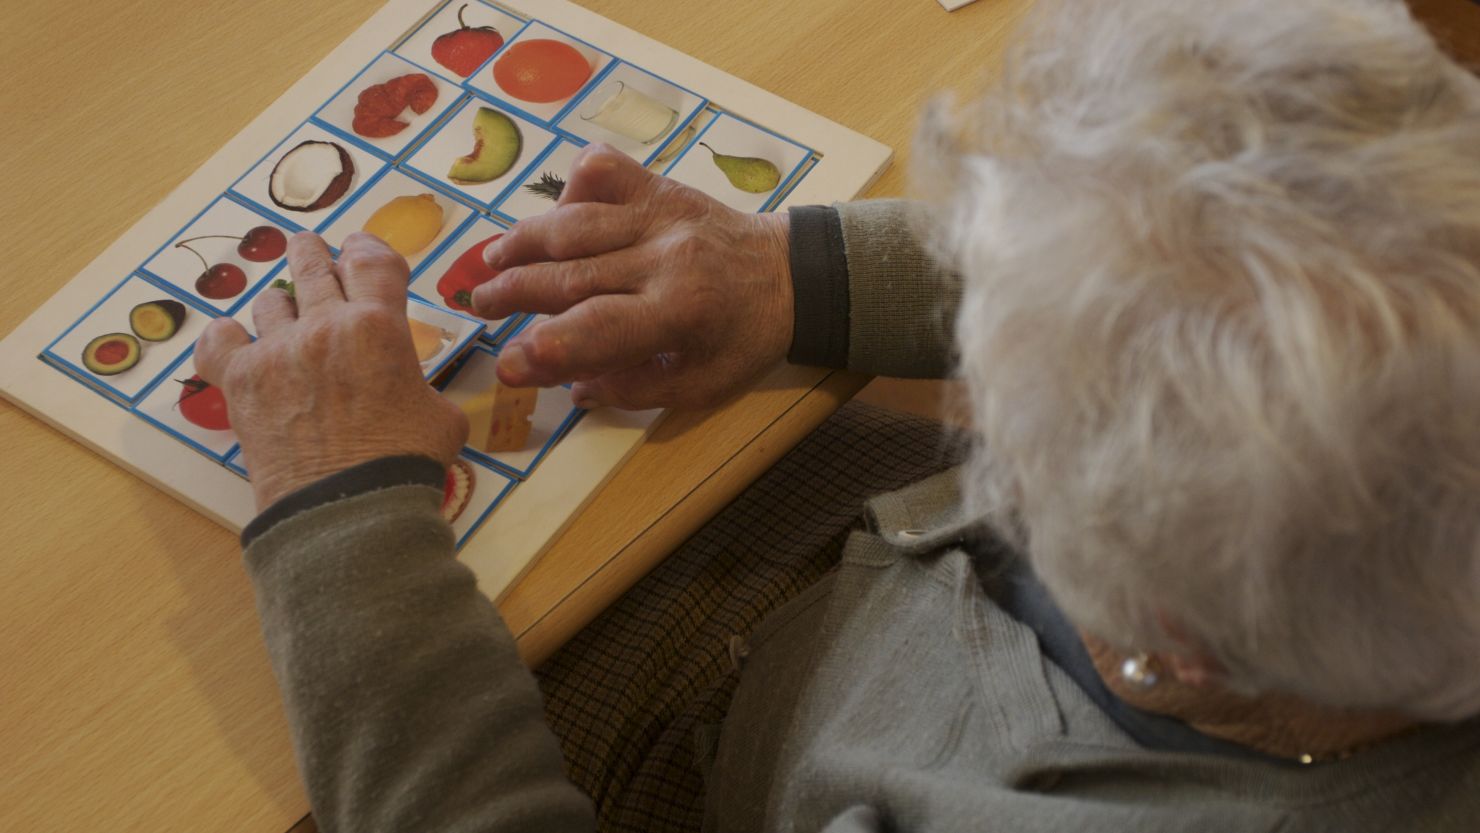 A woman with Alzheimer's at a care center works a puzzle to exercise her mind.